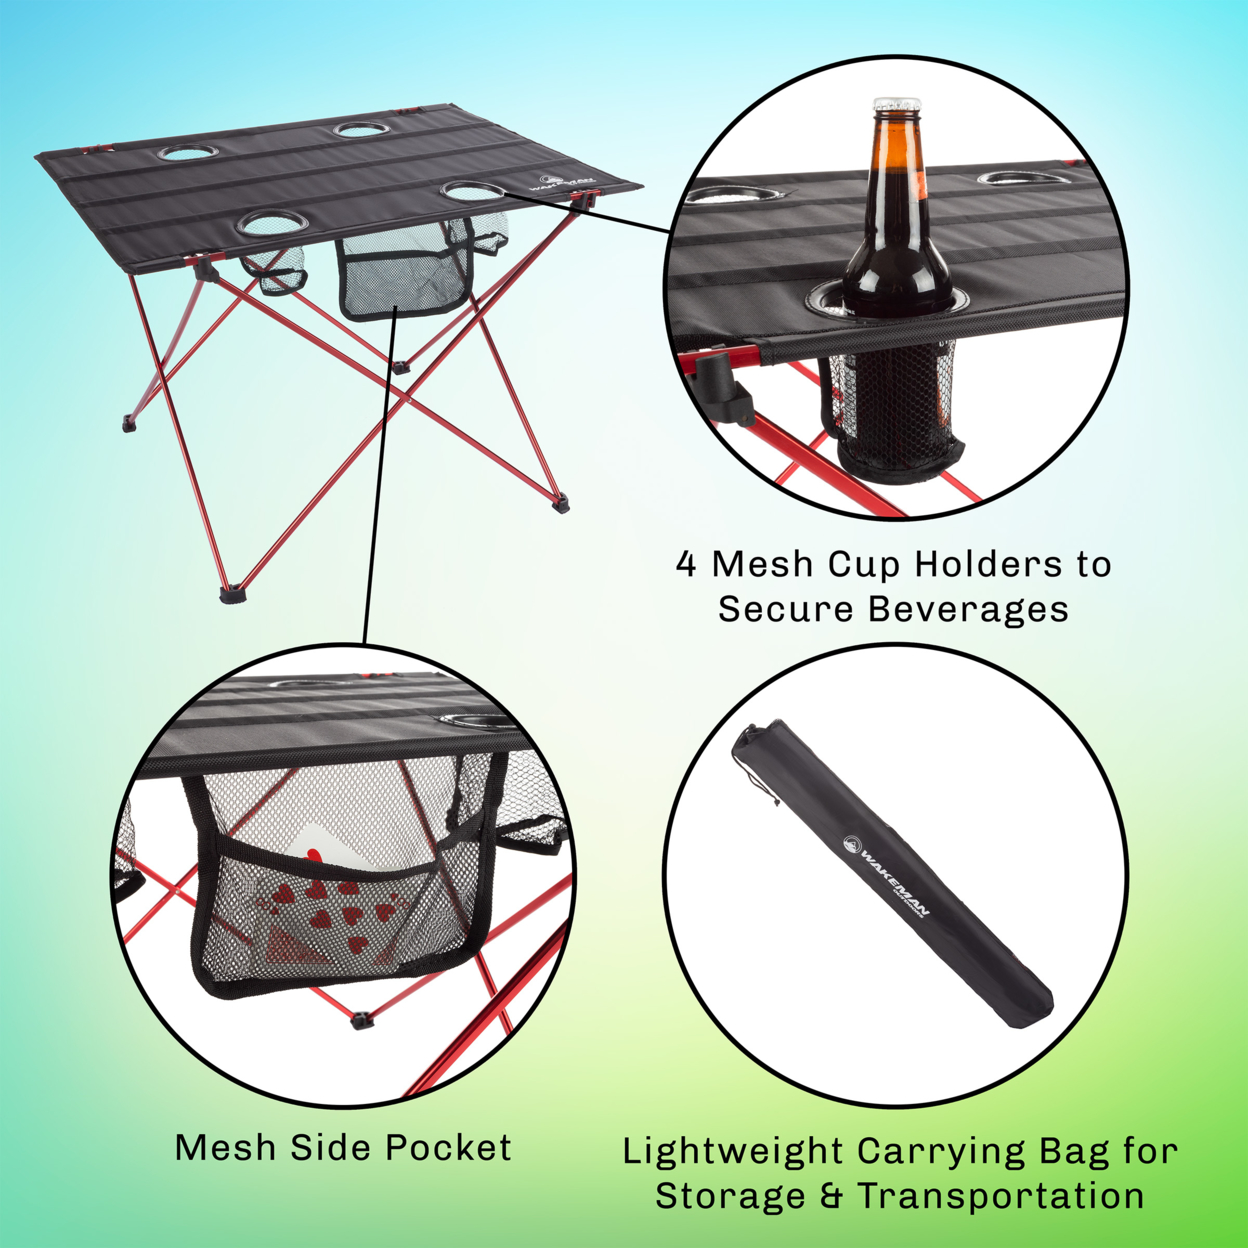 Camp Table-Outdoor Folding Table With 4 Cupholders And Carrying Bag-For Camping, Hiking, Beach, Picnic